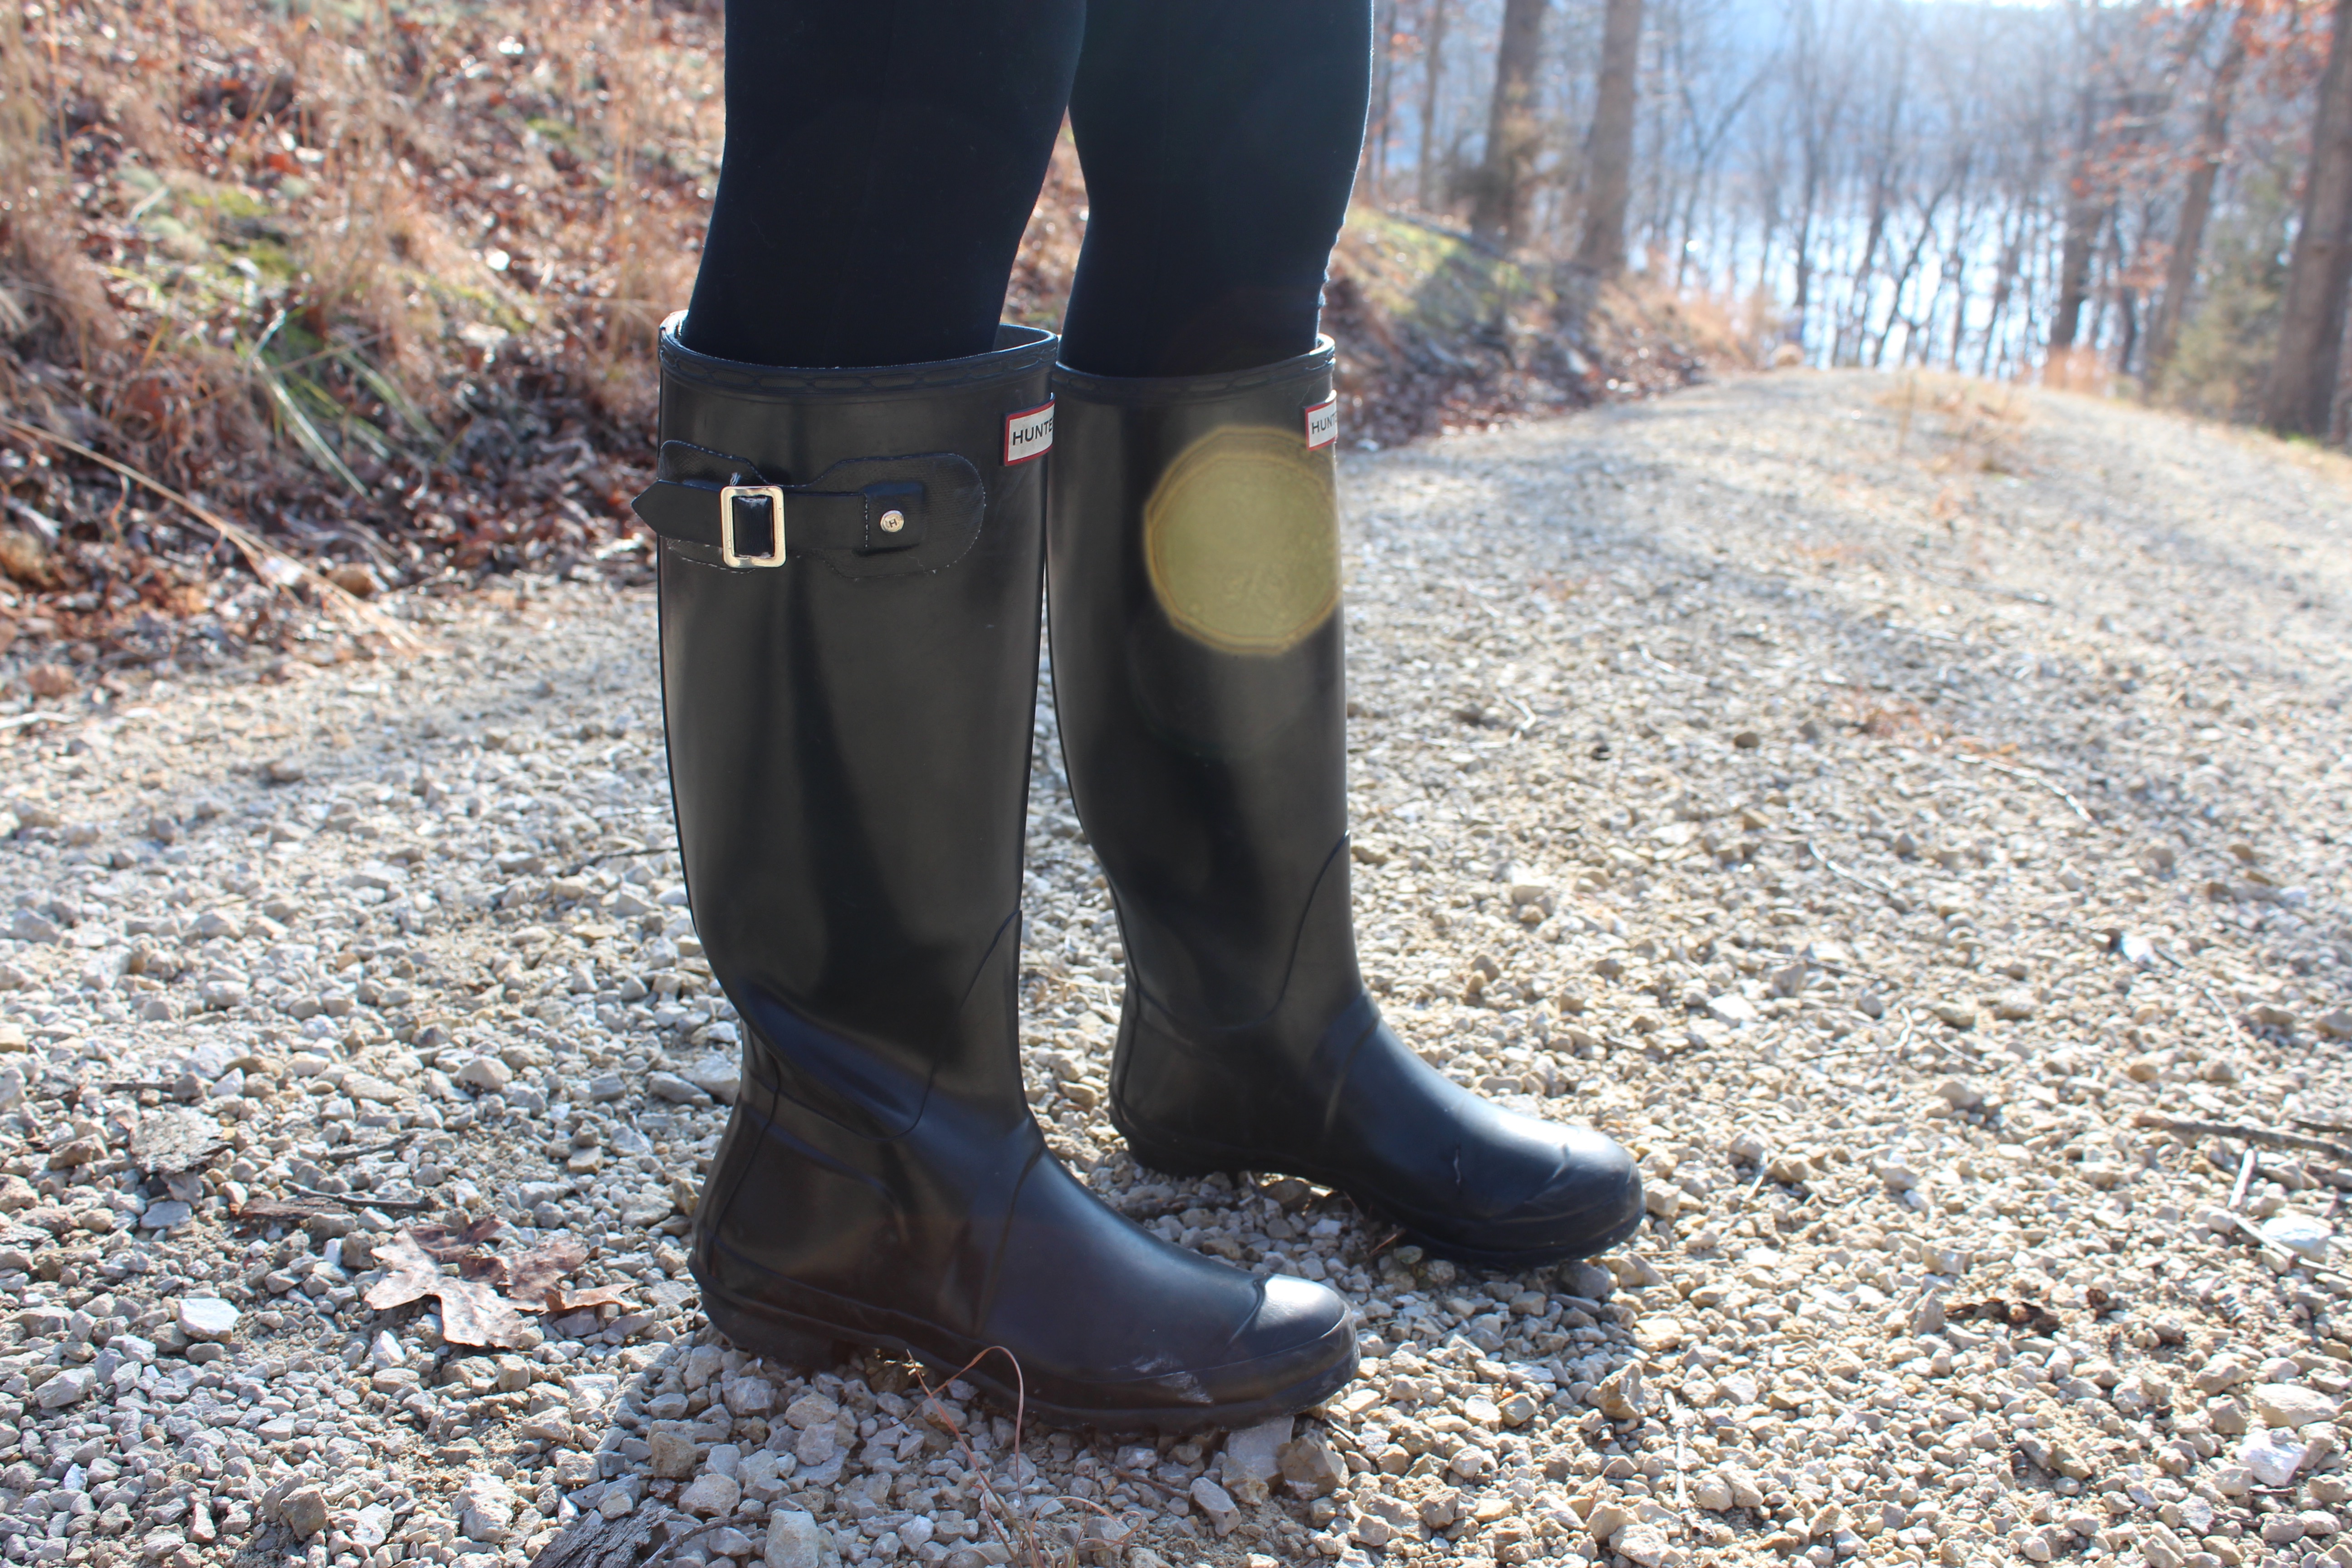 New Years Eve at the Lake | OOTD by Lauren Lindmark on Daily Dose of Charm